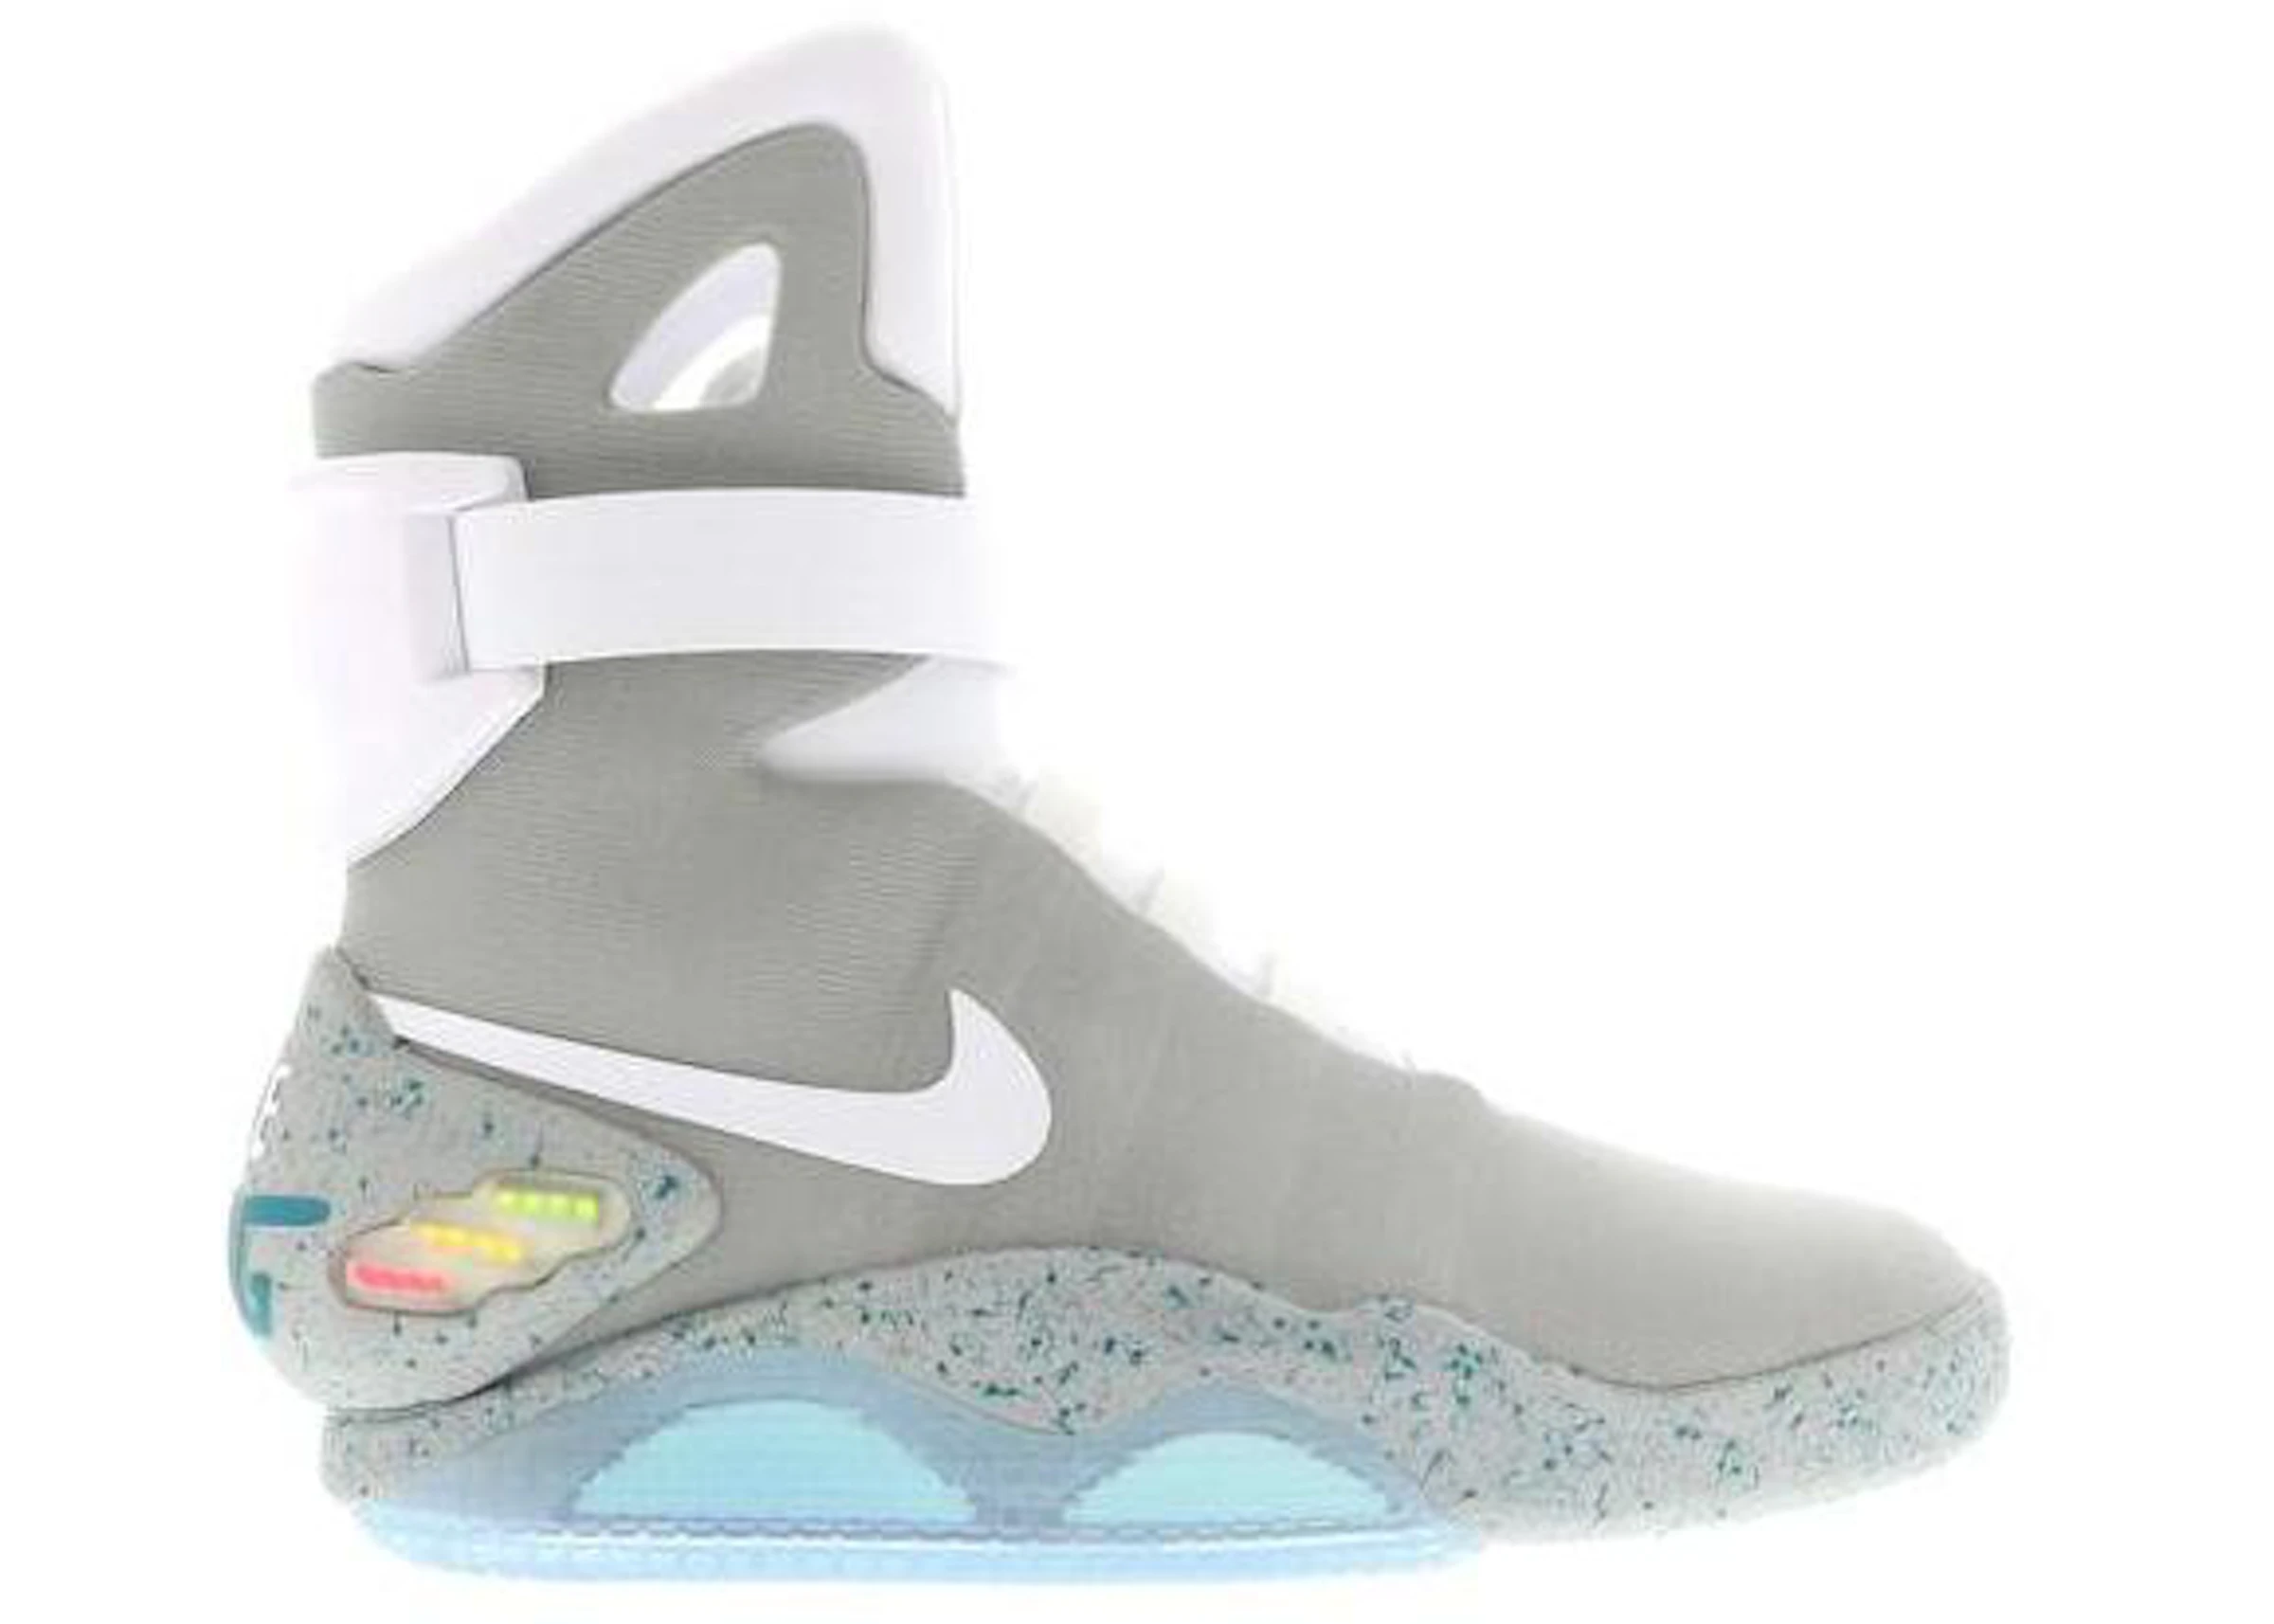 member Entanglement I wear clothes Nike MAG Back to the Future (2016) - HO15MNOTHR402625849 - US